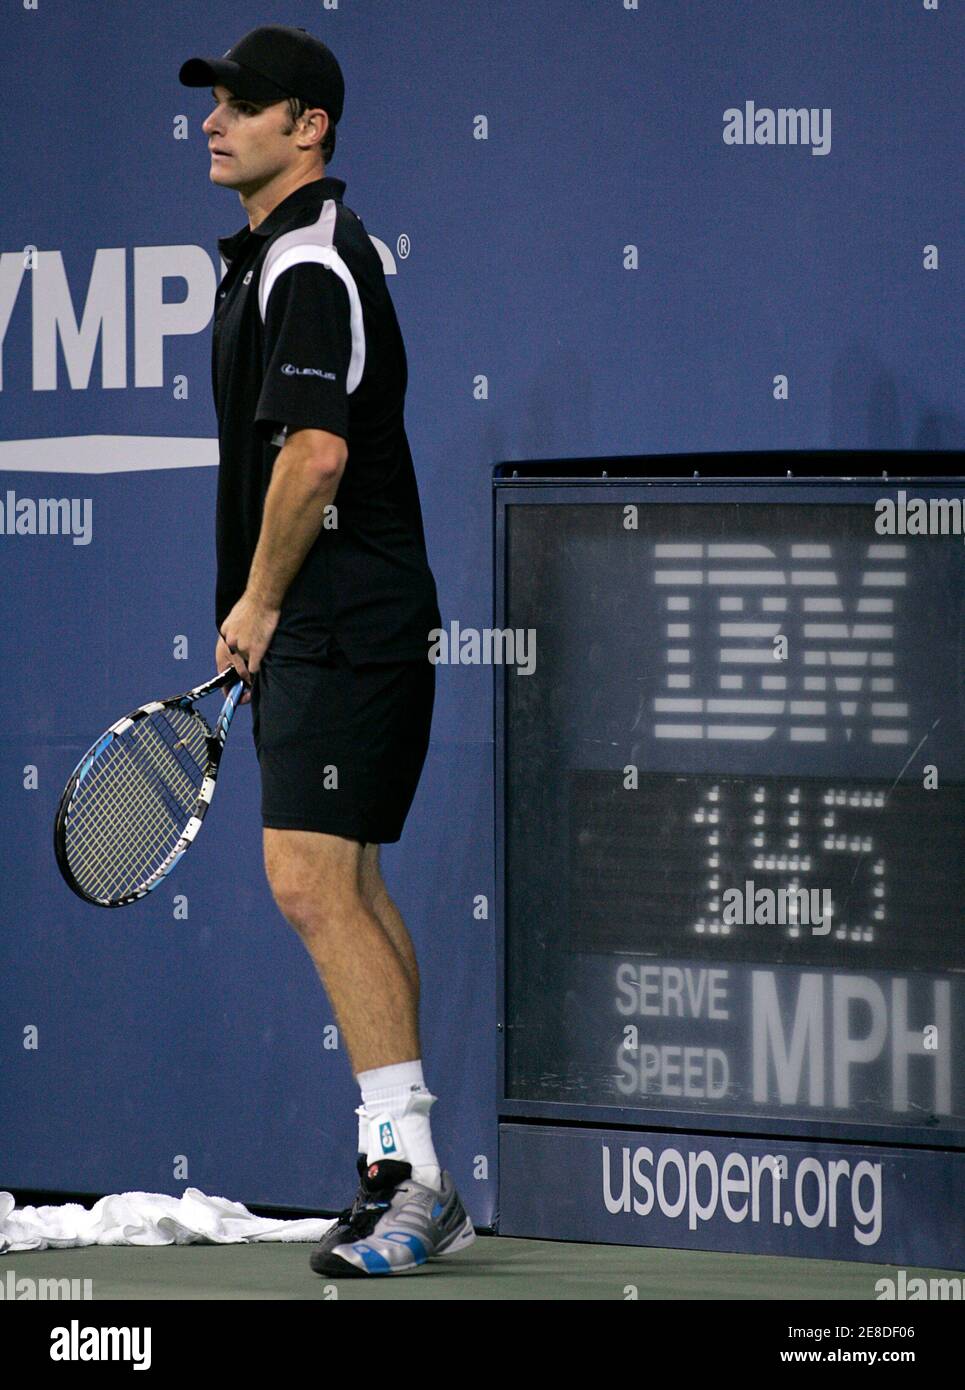 Andy Roddick of the United States stands next to a server display showing the speed of his last serve to compatriot Justin Gimelstob during their match at the U.S. Open tennis tournament in Flushing Meadows, New York, August 28, 2007.   REUTERS/Kevin Lamarque Stock Photo